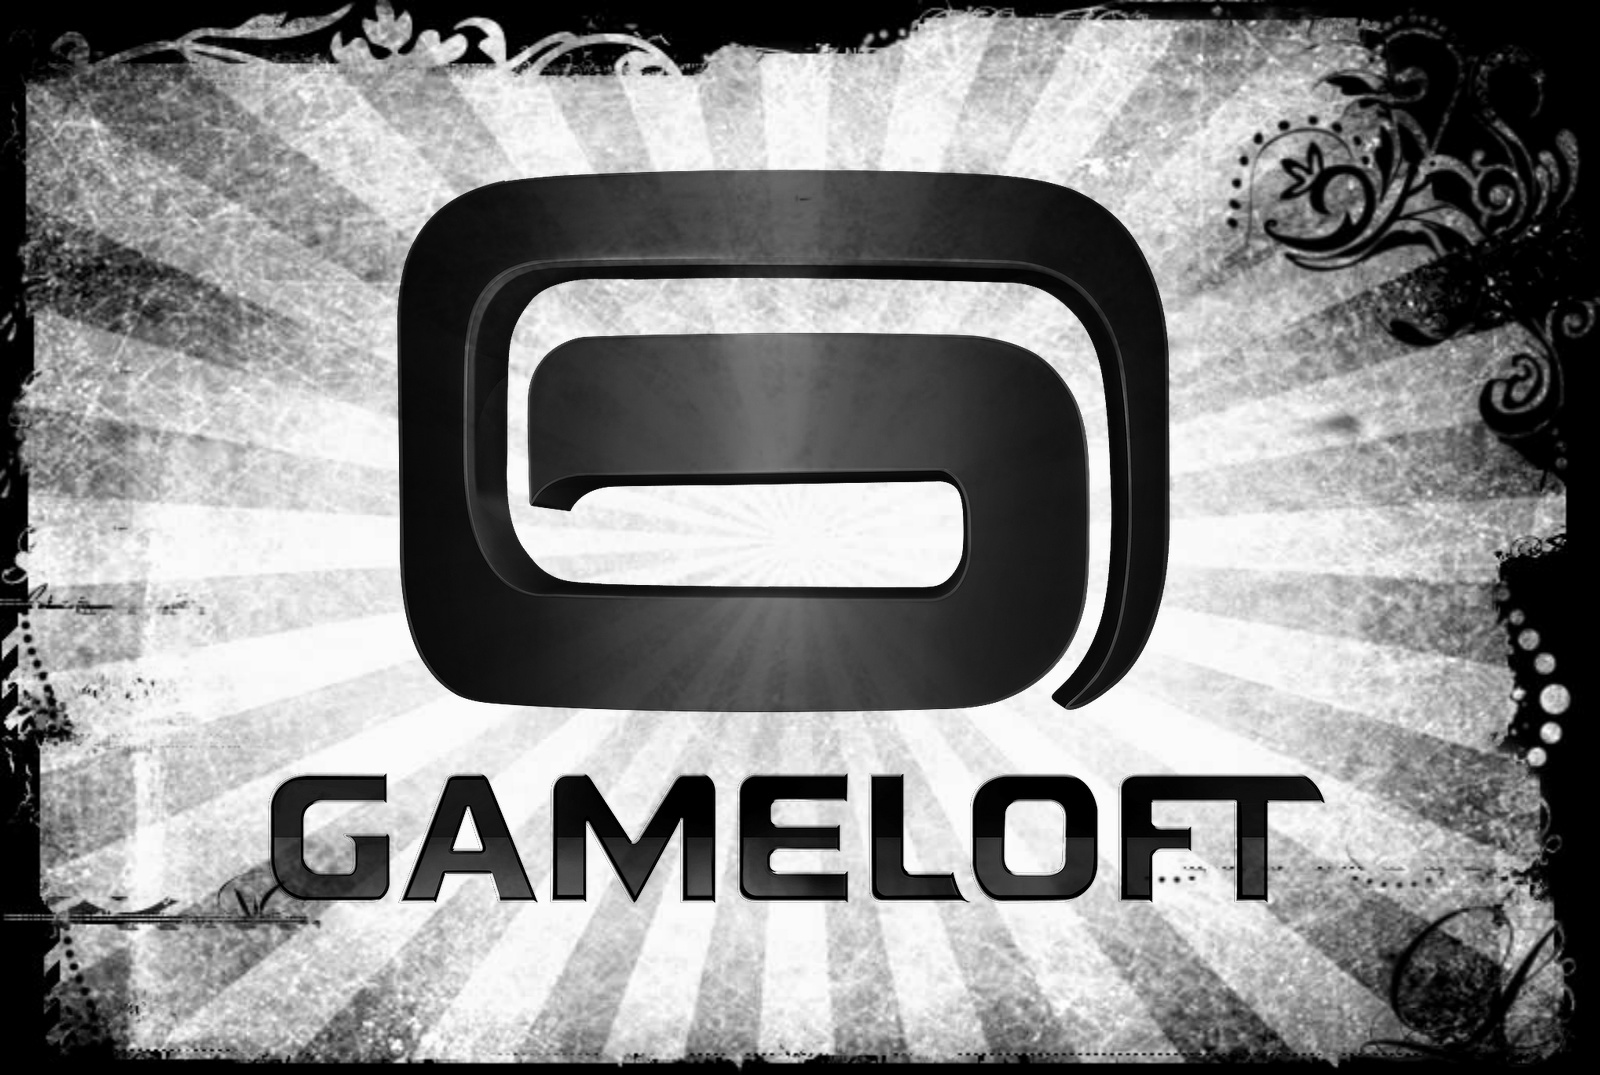 Cheating Codes For Gameloft Games